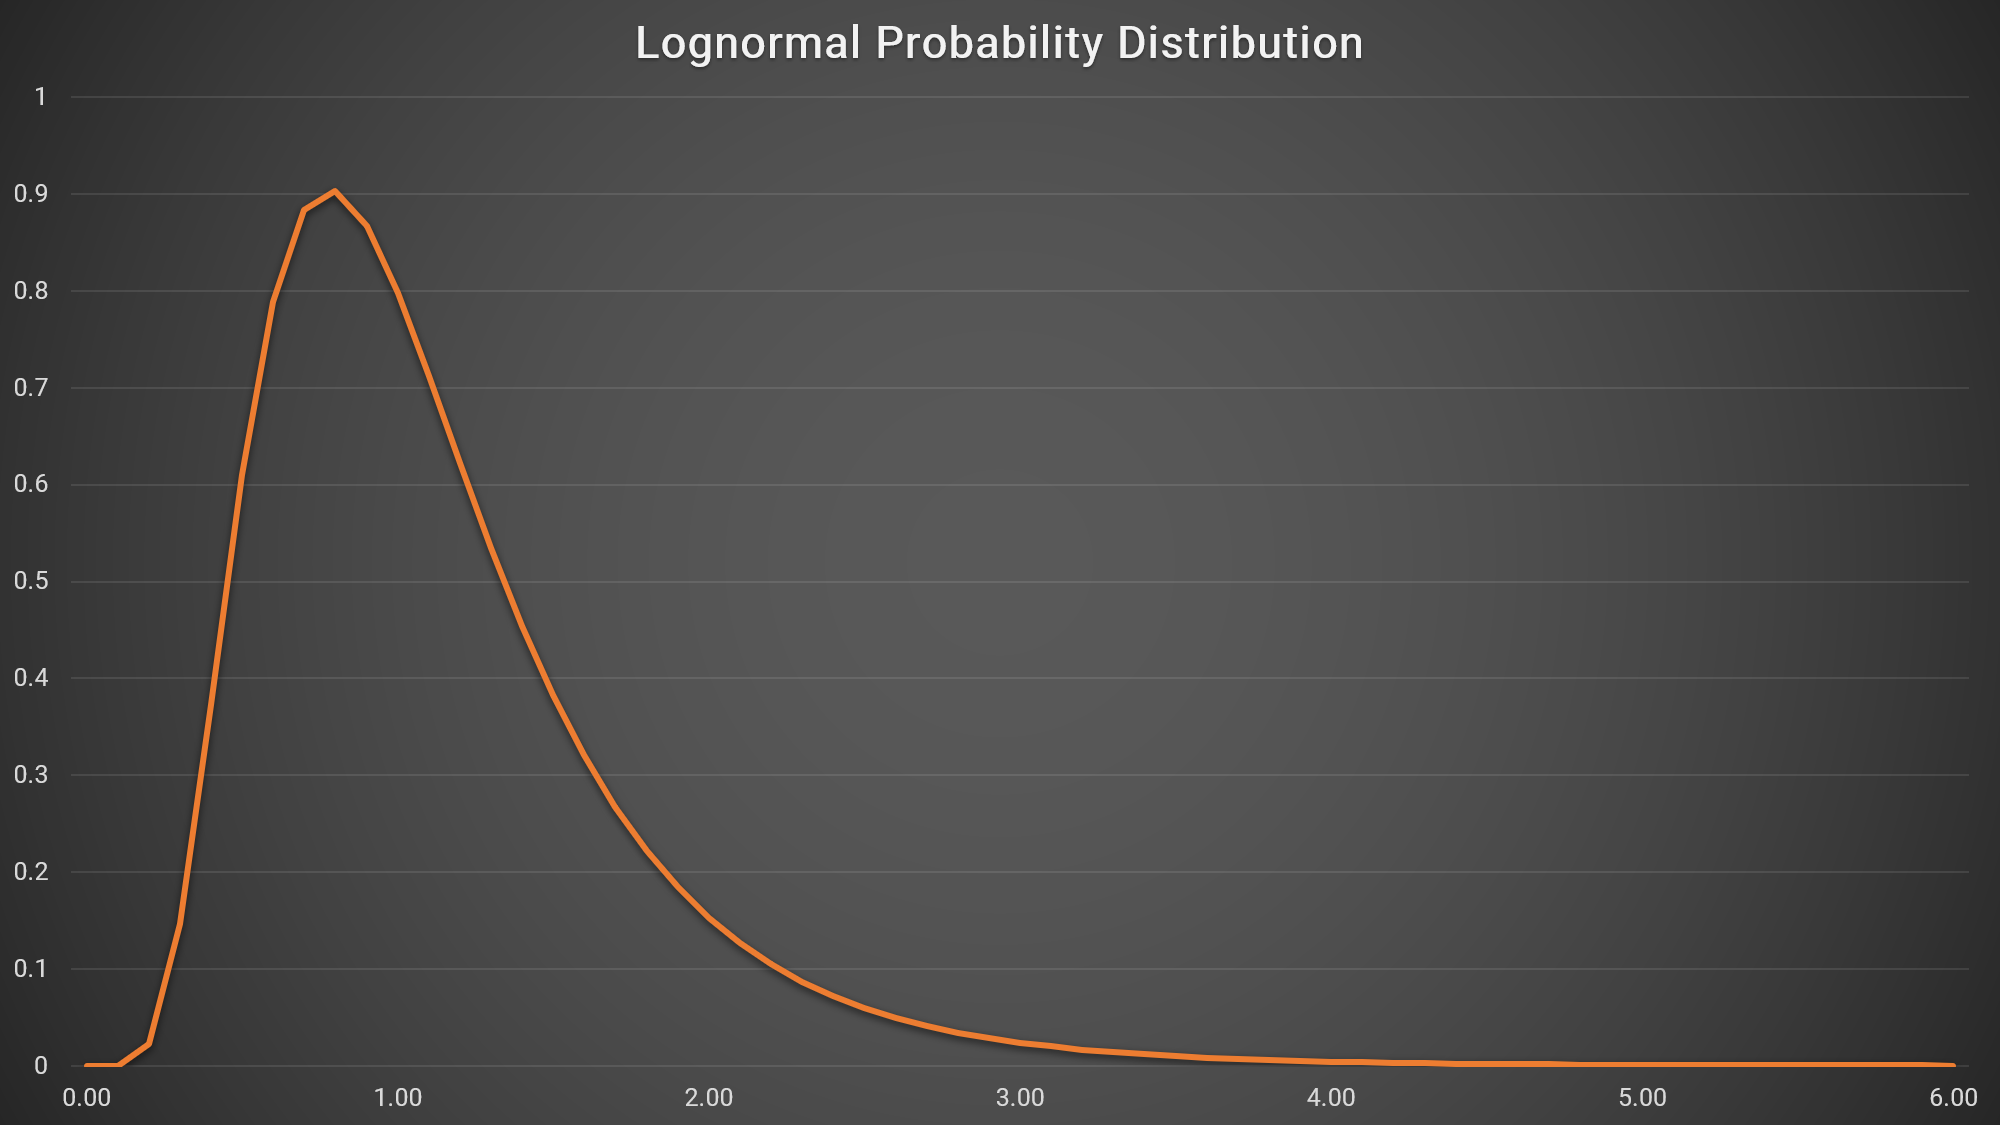 However, while the extent to which we should build fat tails and black swans into option pricing is open to debate, we have recently been presented with a problem that is beyond debate. If Black-Scholes and other techniques treat daily logarithmic returns as being normally distributed, then by implication they treat the price of the underlying asset as being lognormally distributed. And if a share or index is to be regarded as lognormally distributed, then its price cannot be negative. 